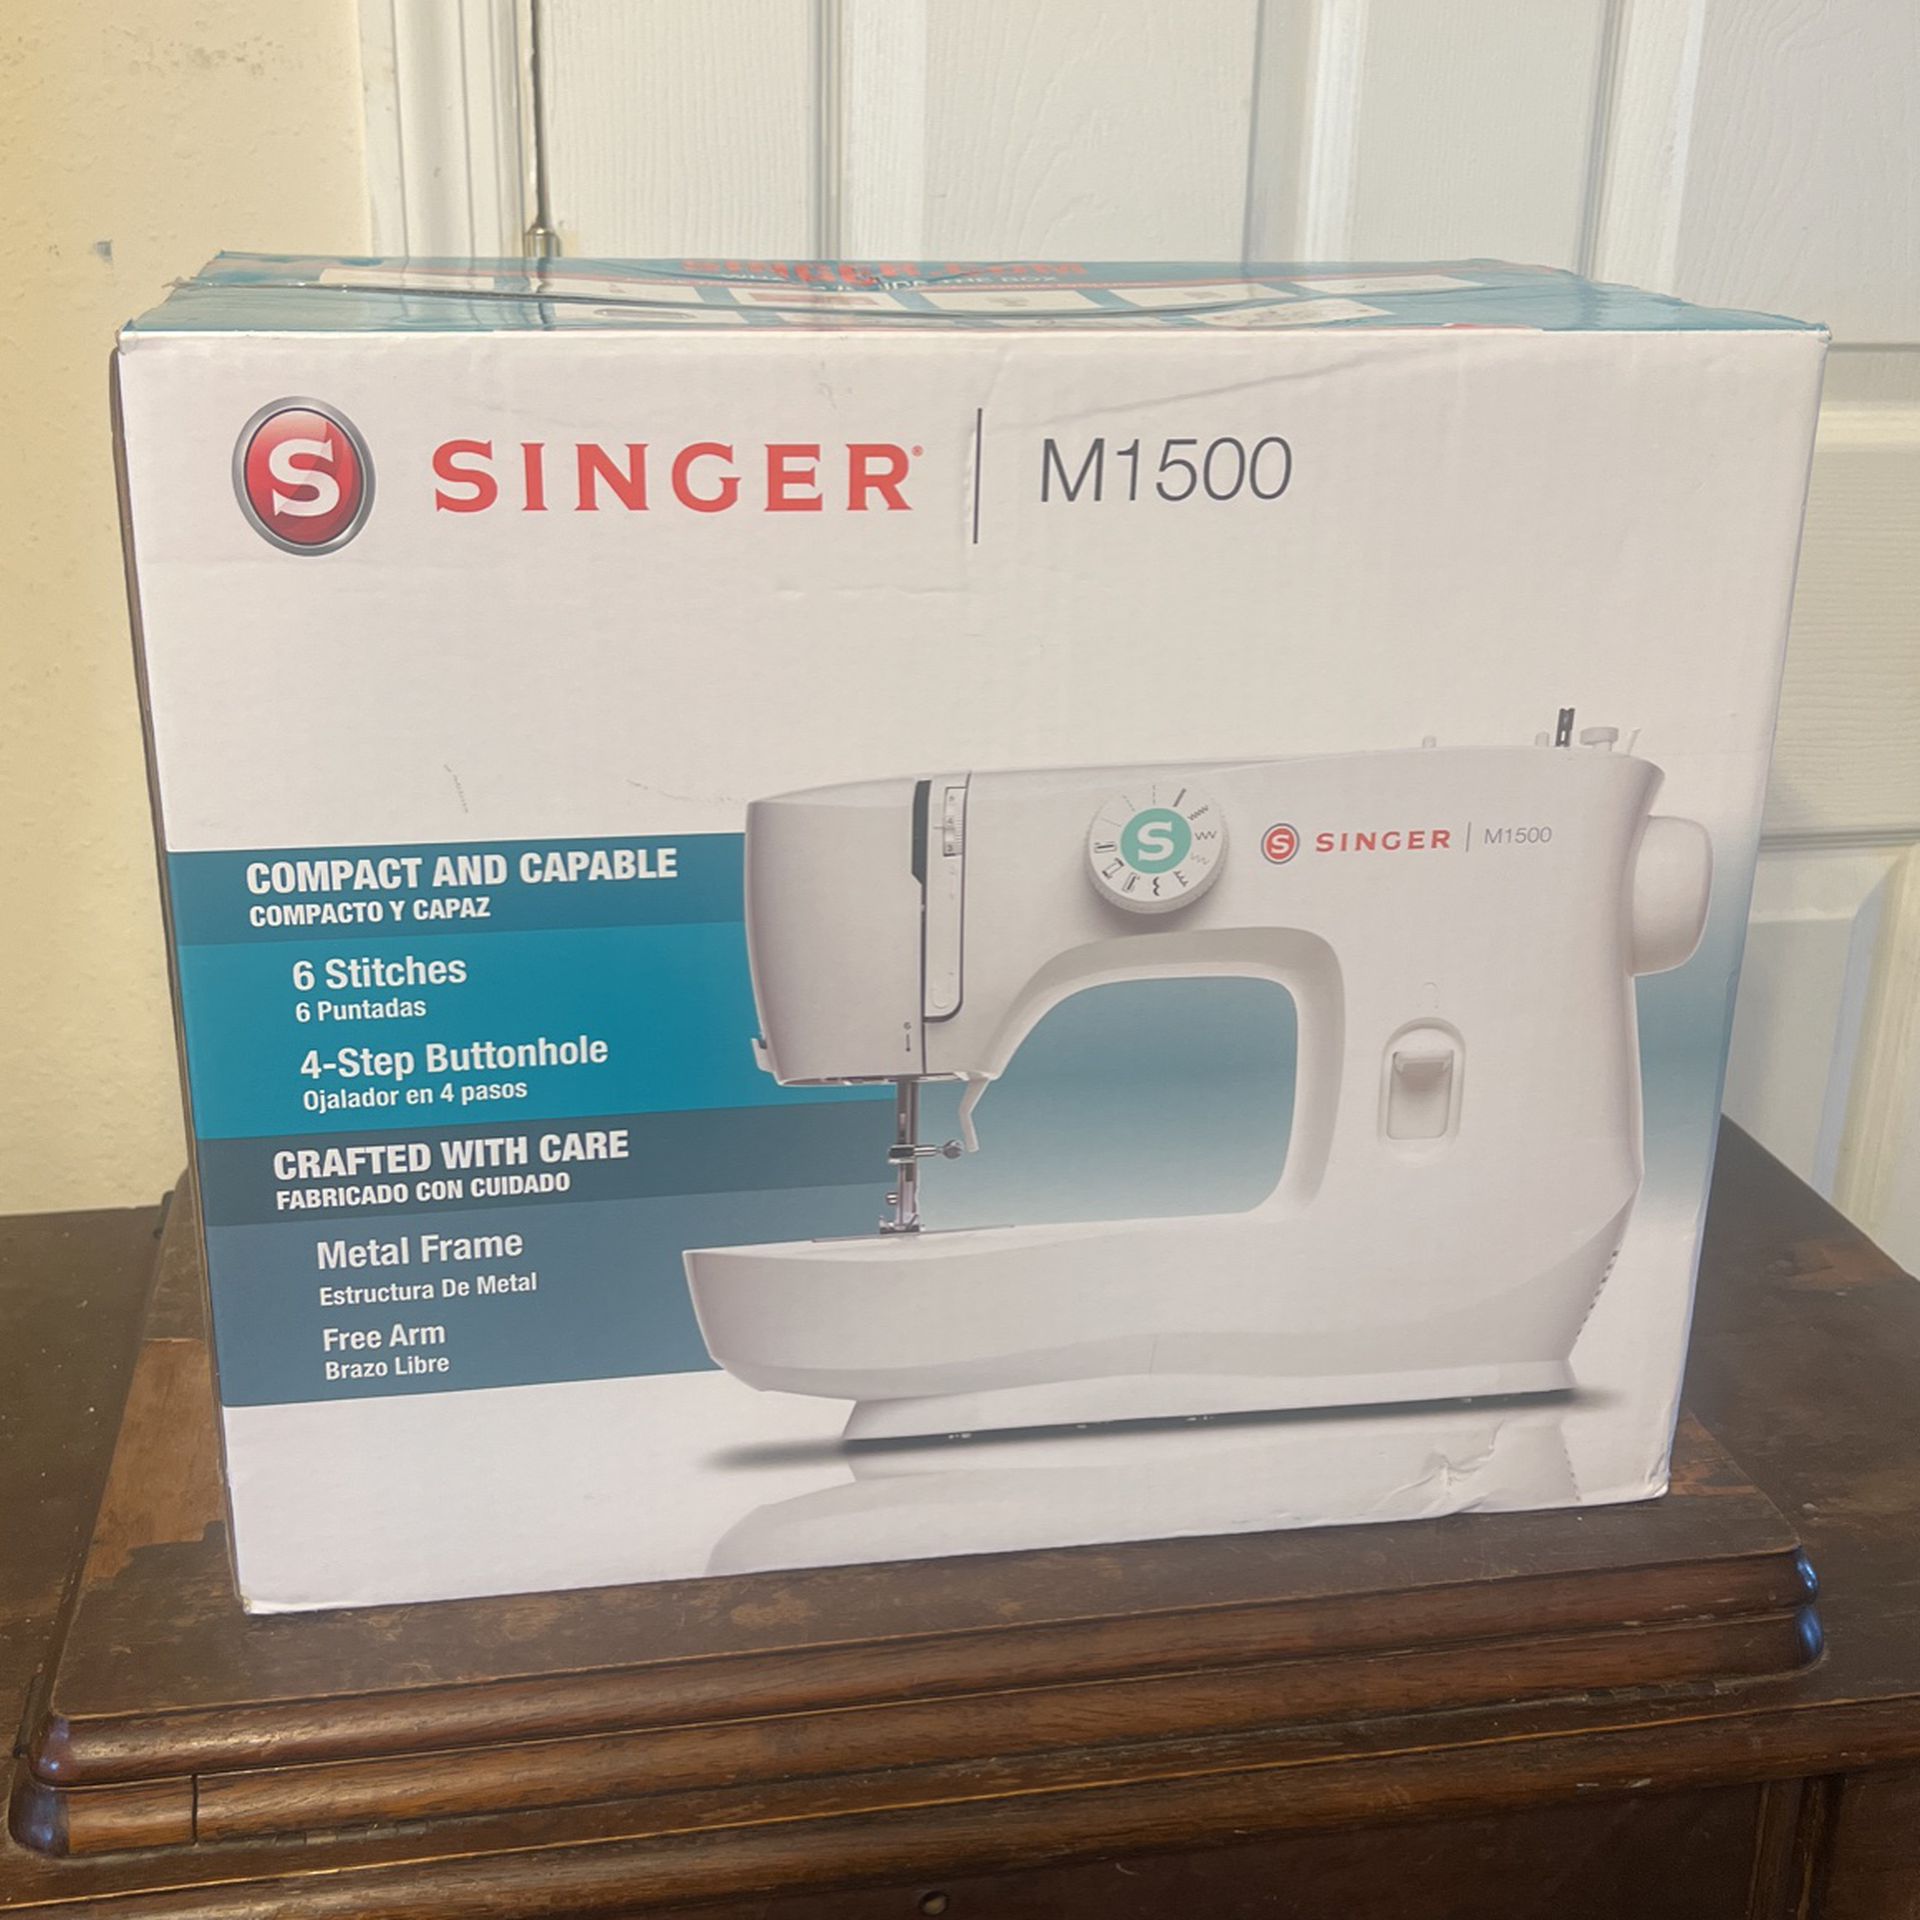 Singer M1500 Sewing Machine for Sale in Port St. Lucie, FL - OfferUp